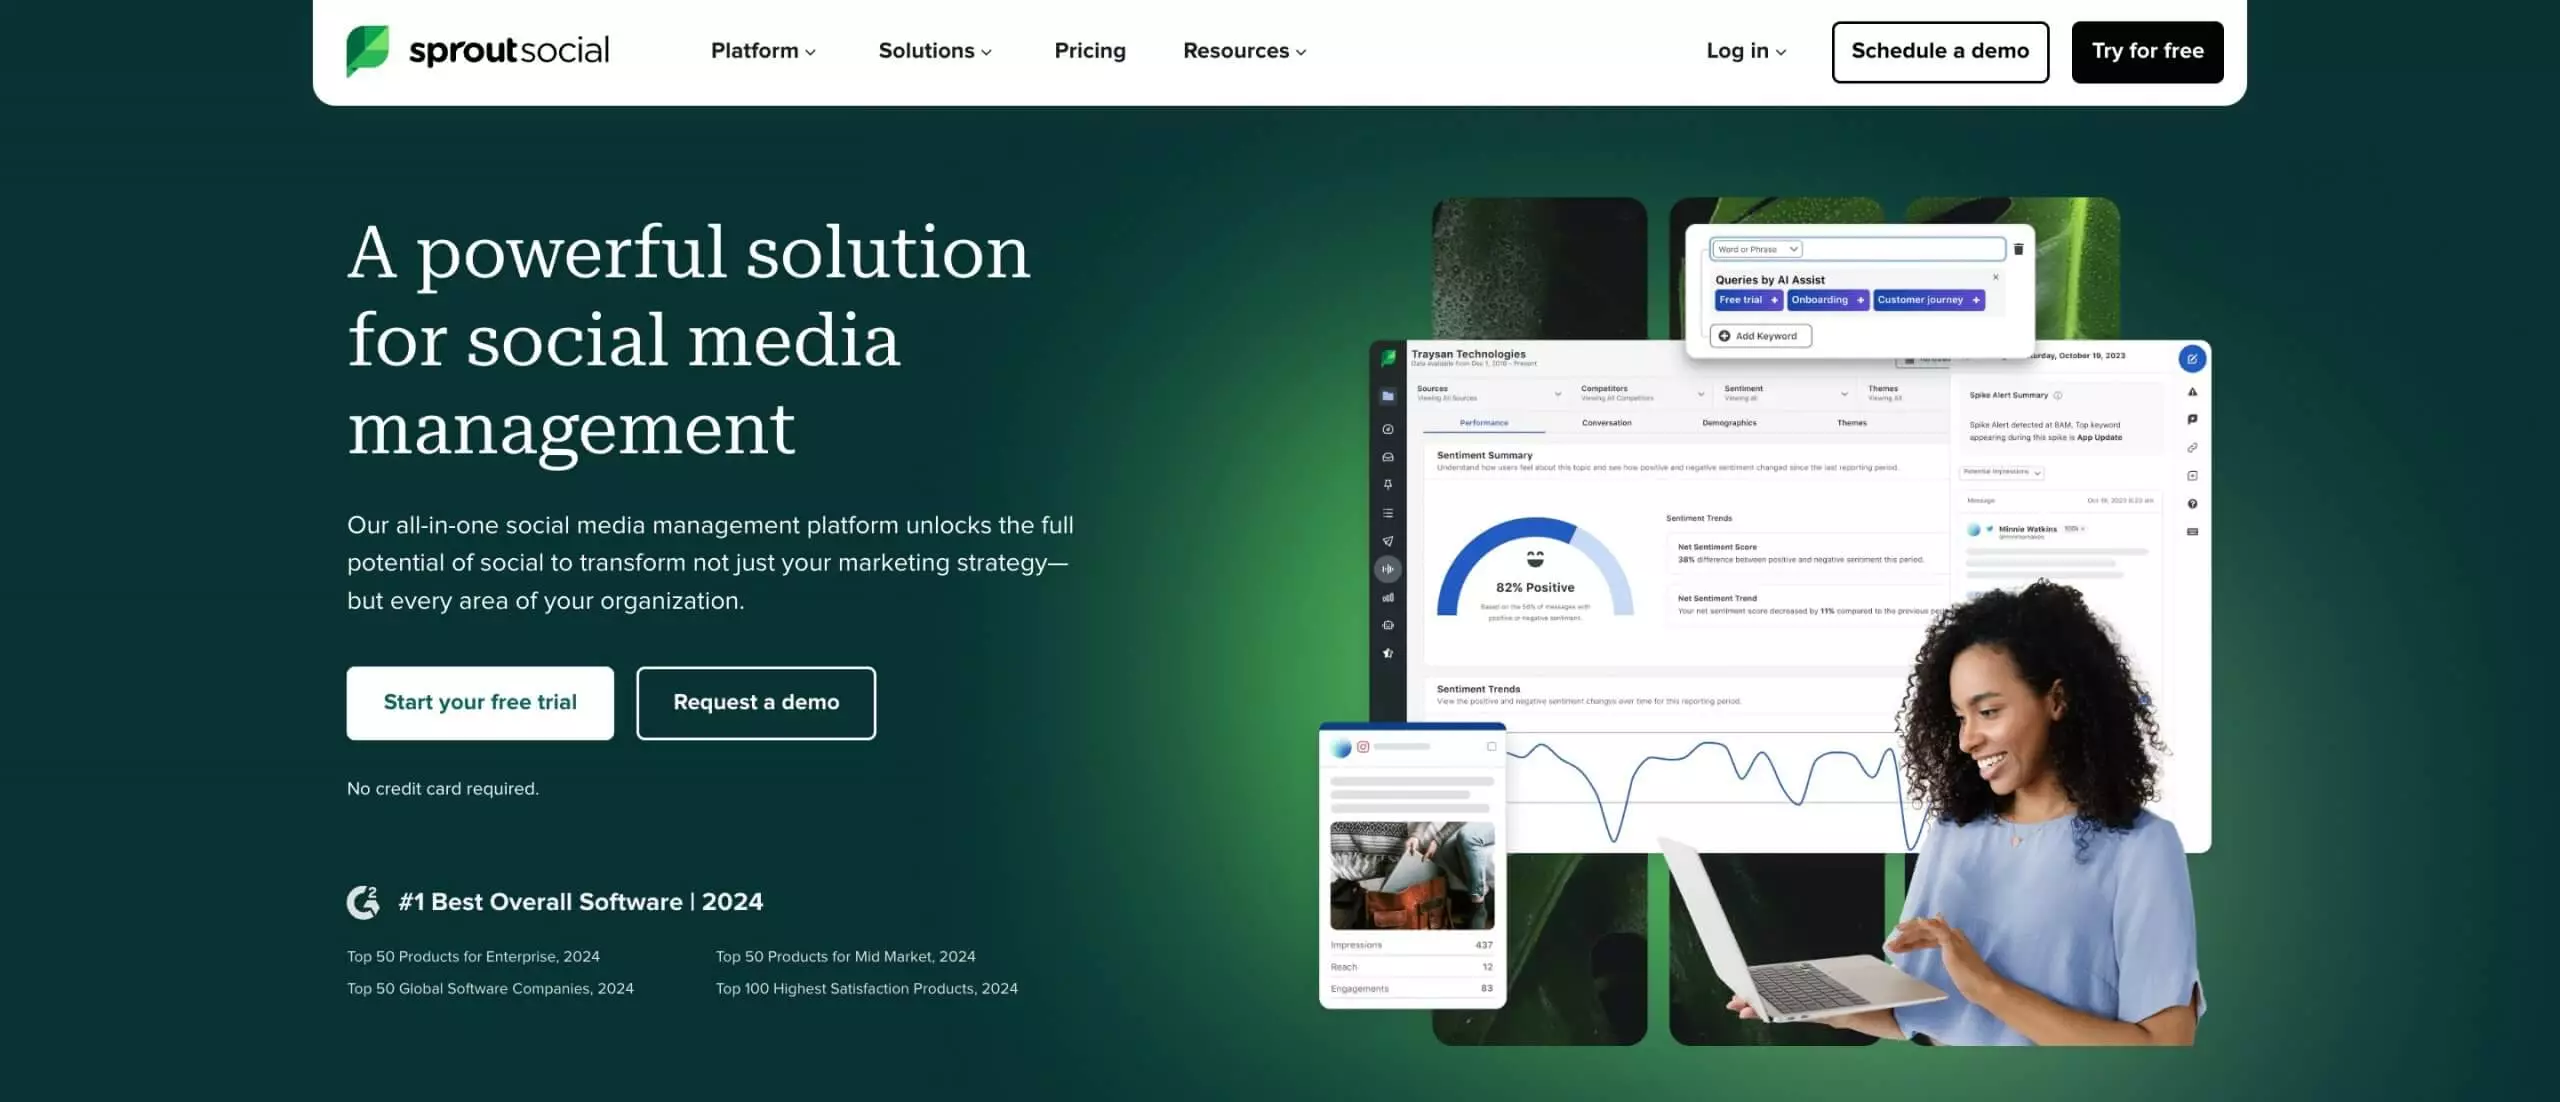 Sprout Social's homepage showcasing advanced social media management and analytics tools.